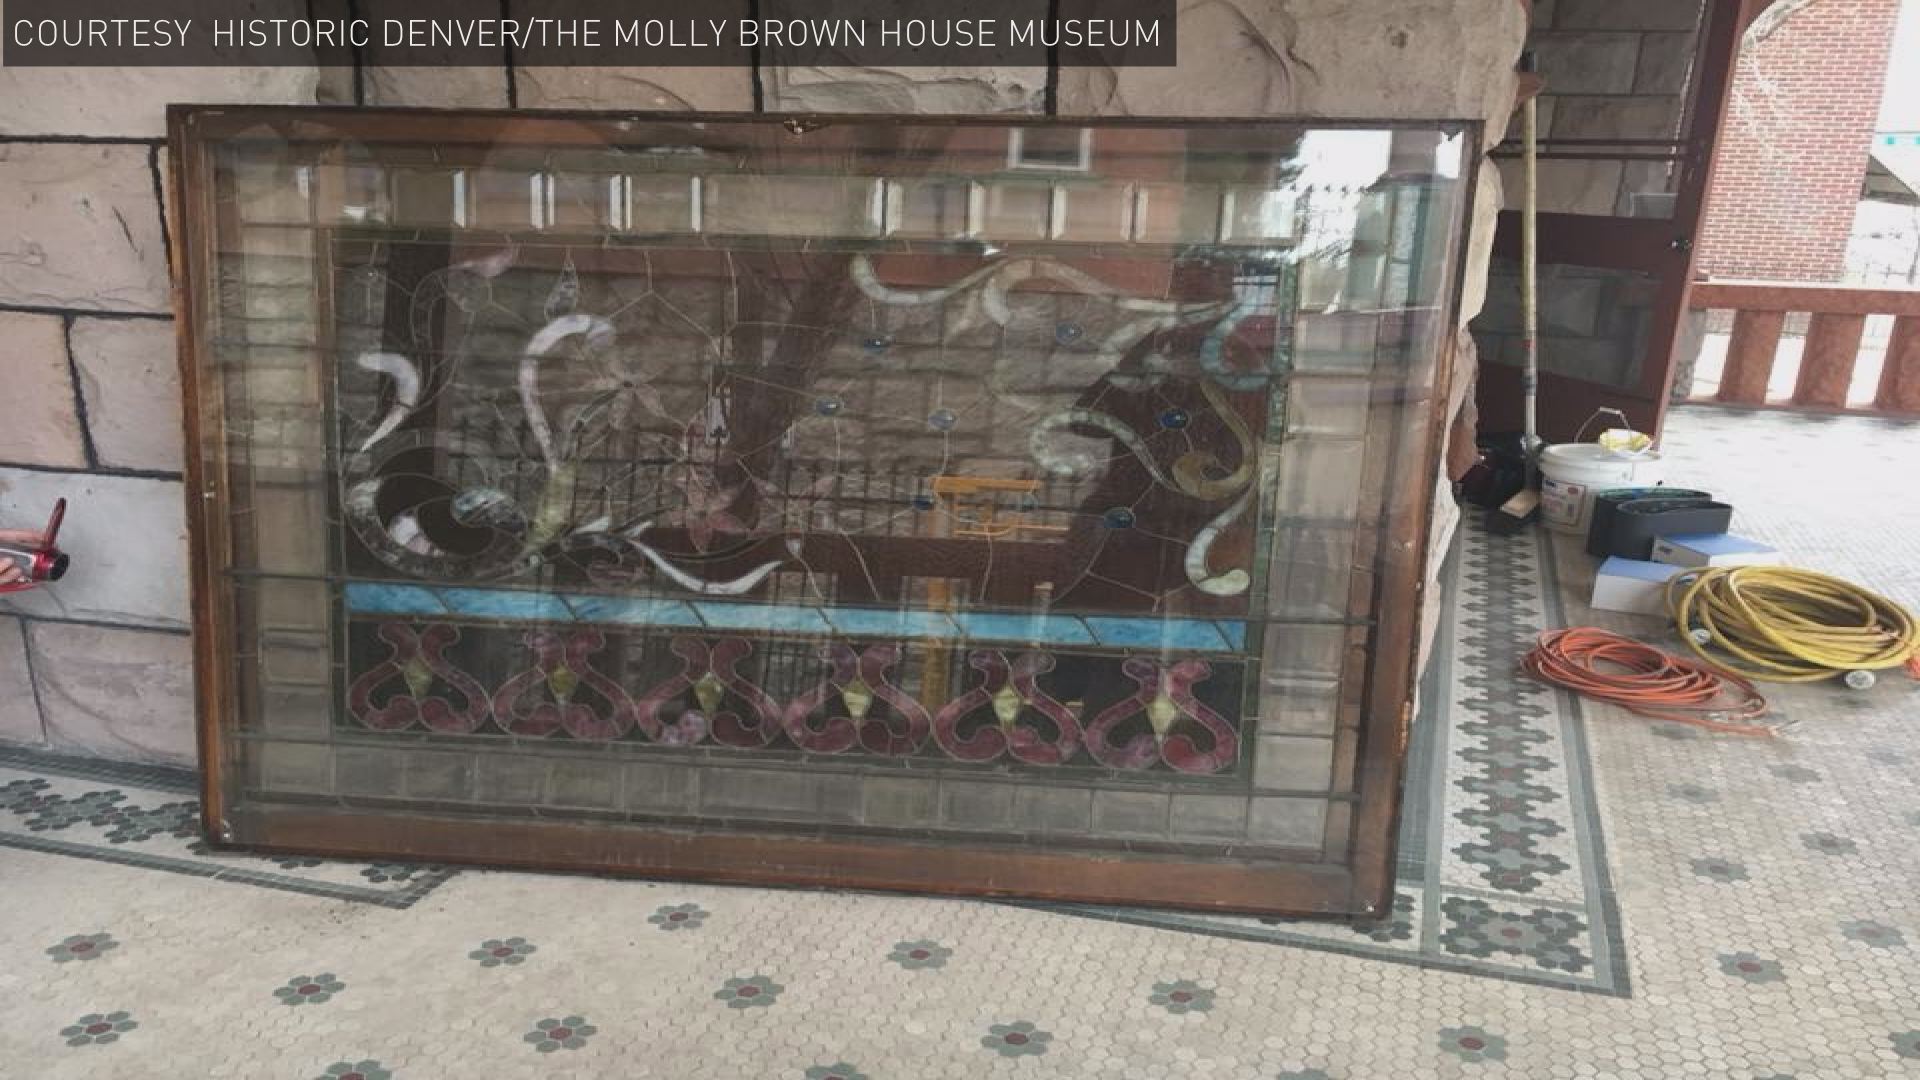 Watkins Stained Glass and the Molly Brown House Museum - Molly Brown House  Museum